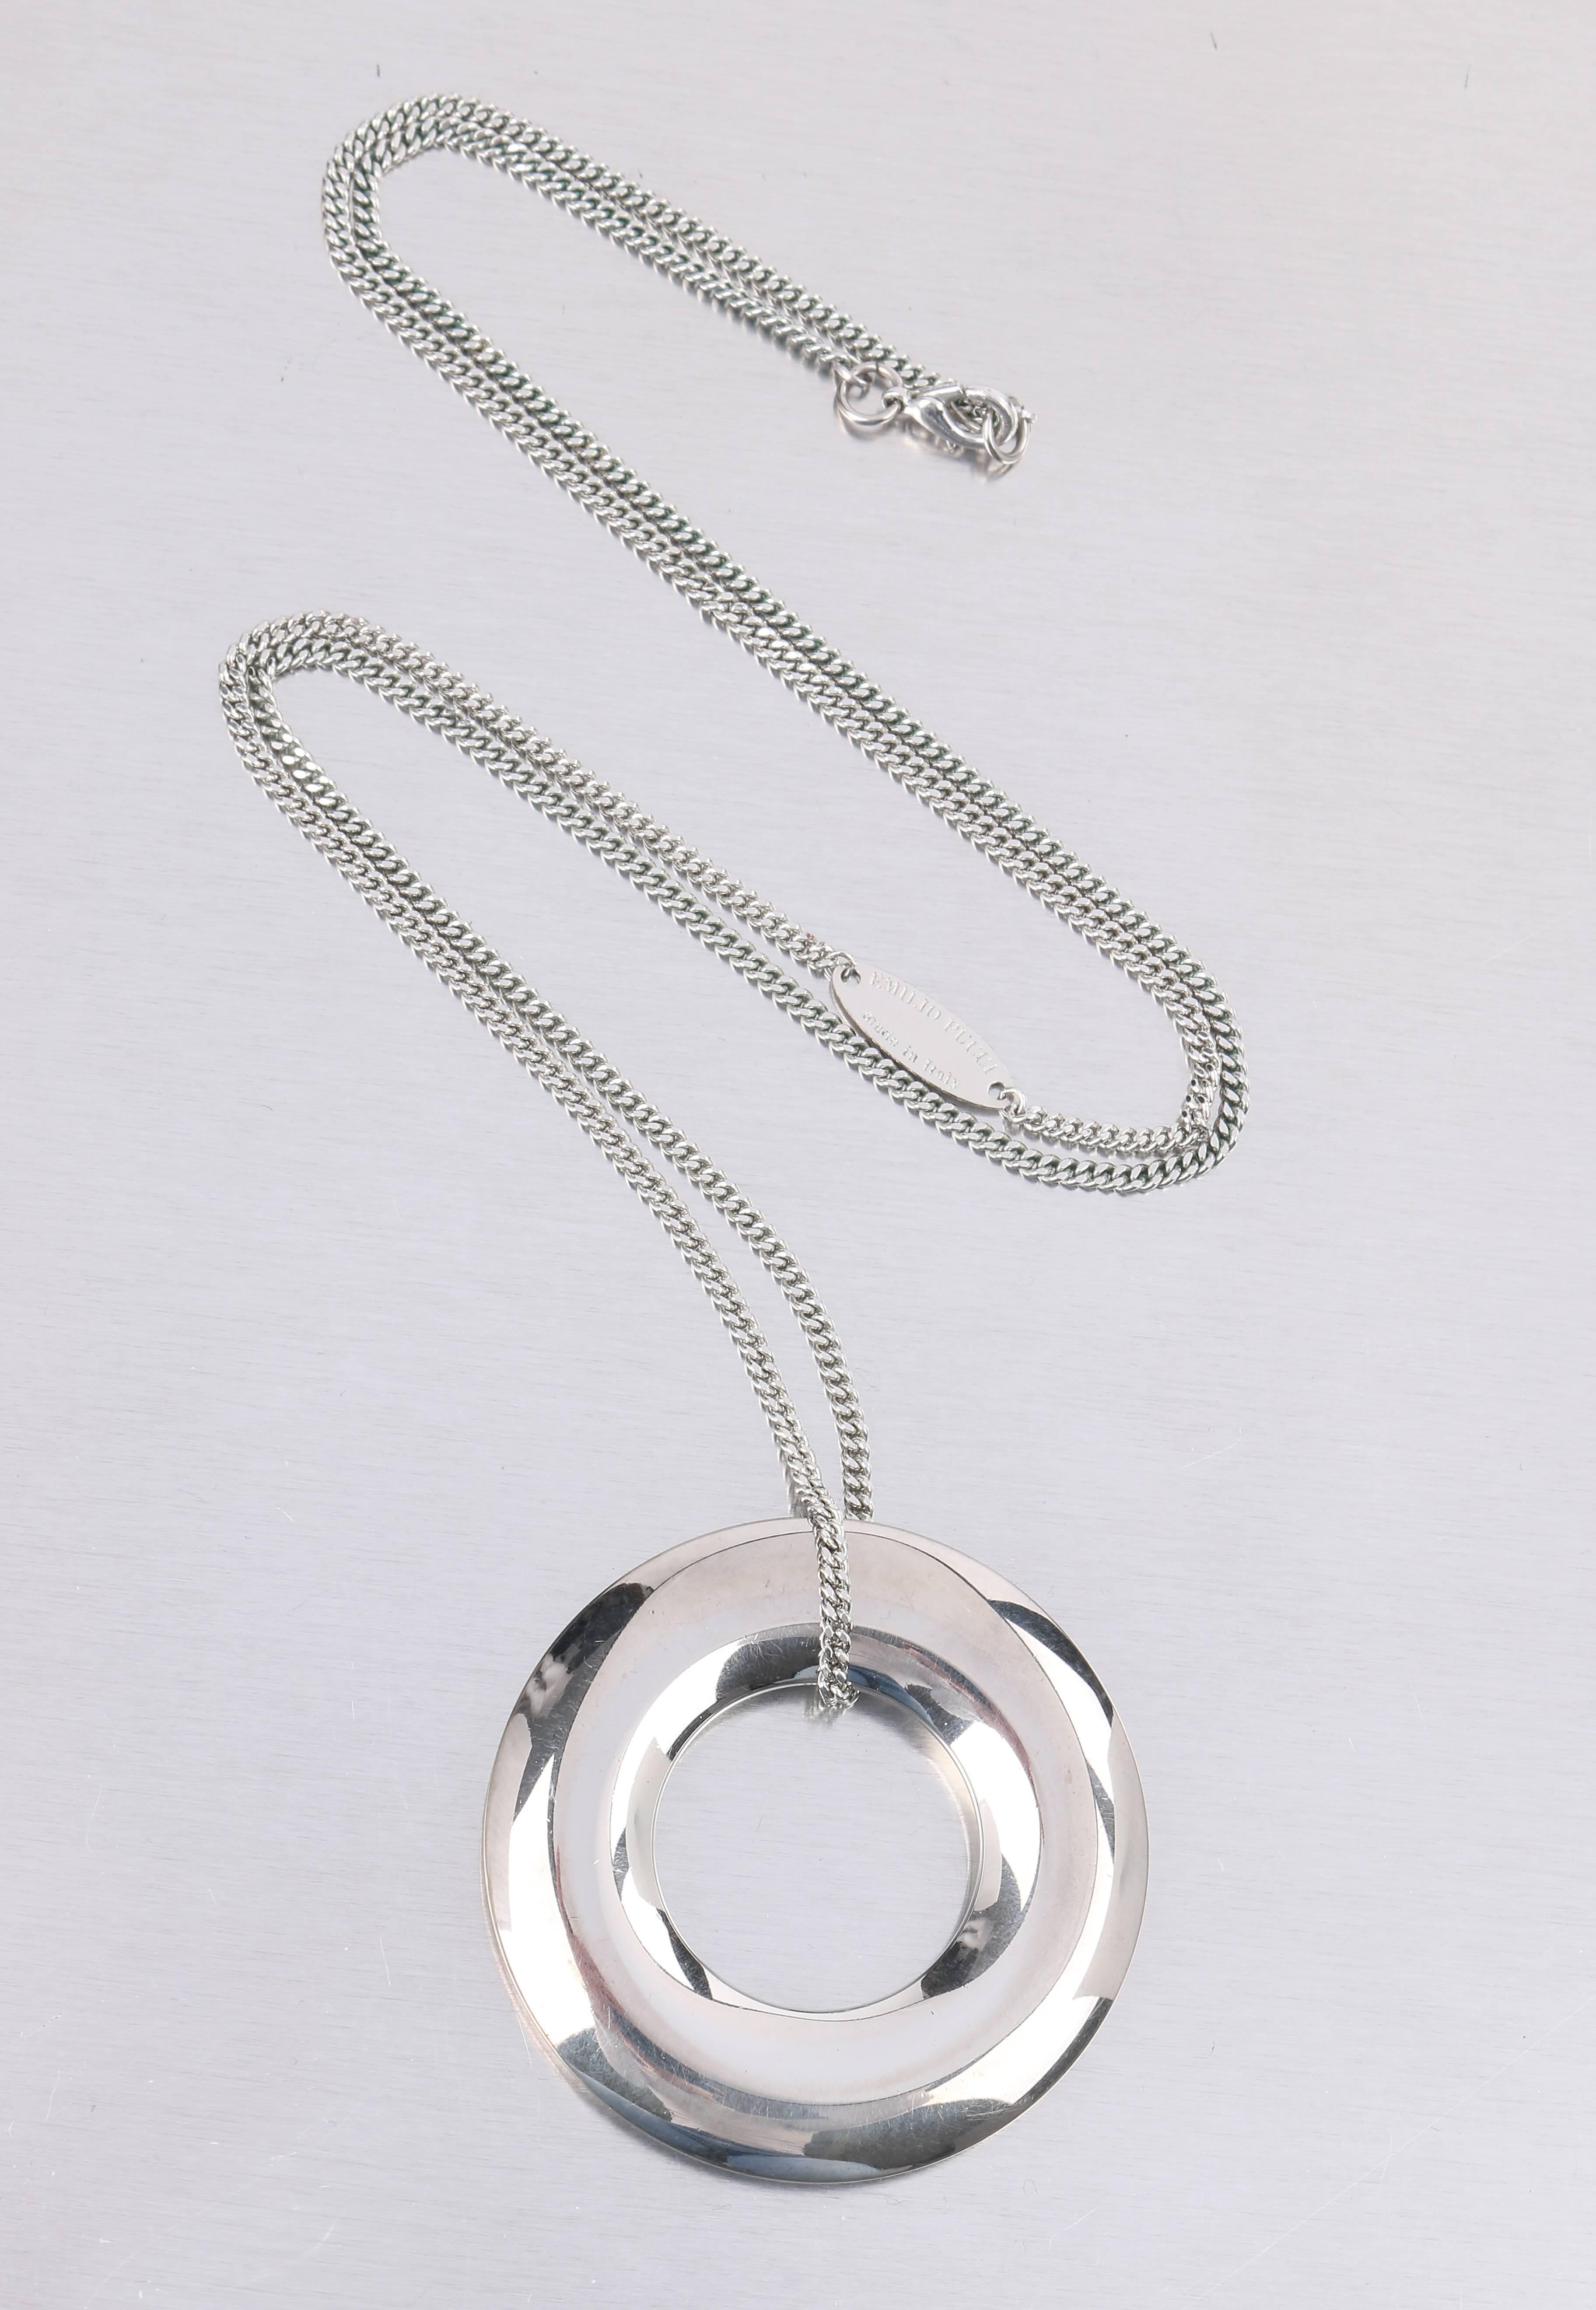 Rare Emilio Pucci long silver-toned O-ring pendant statement necklace. Large silver-toned polished metal O-ring pendant. Pendant is suspended from a long thin curb chain with an oval tag stamped 